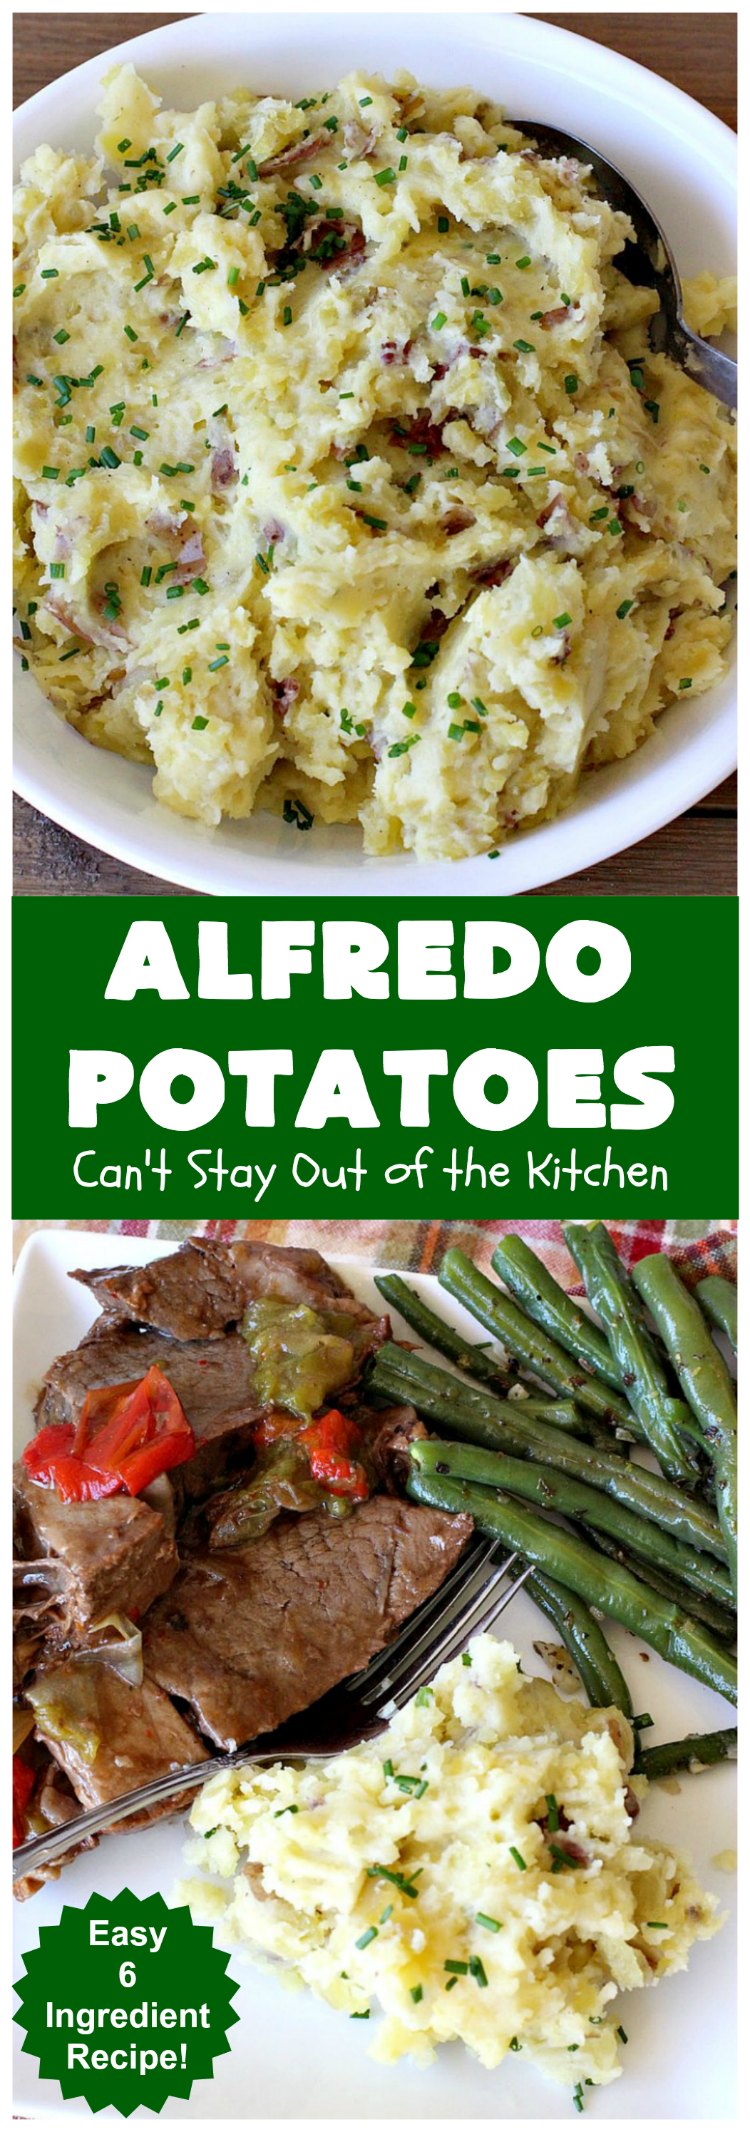 Alfredo Potatoes | Can't Stay Out of the Kitchen